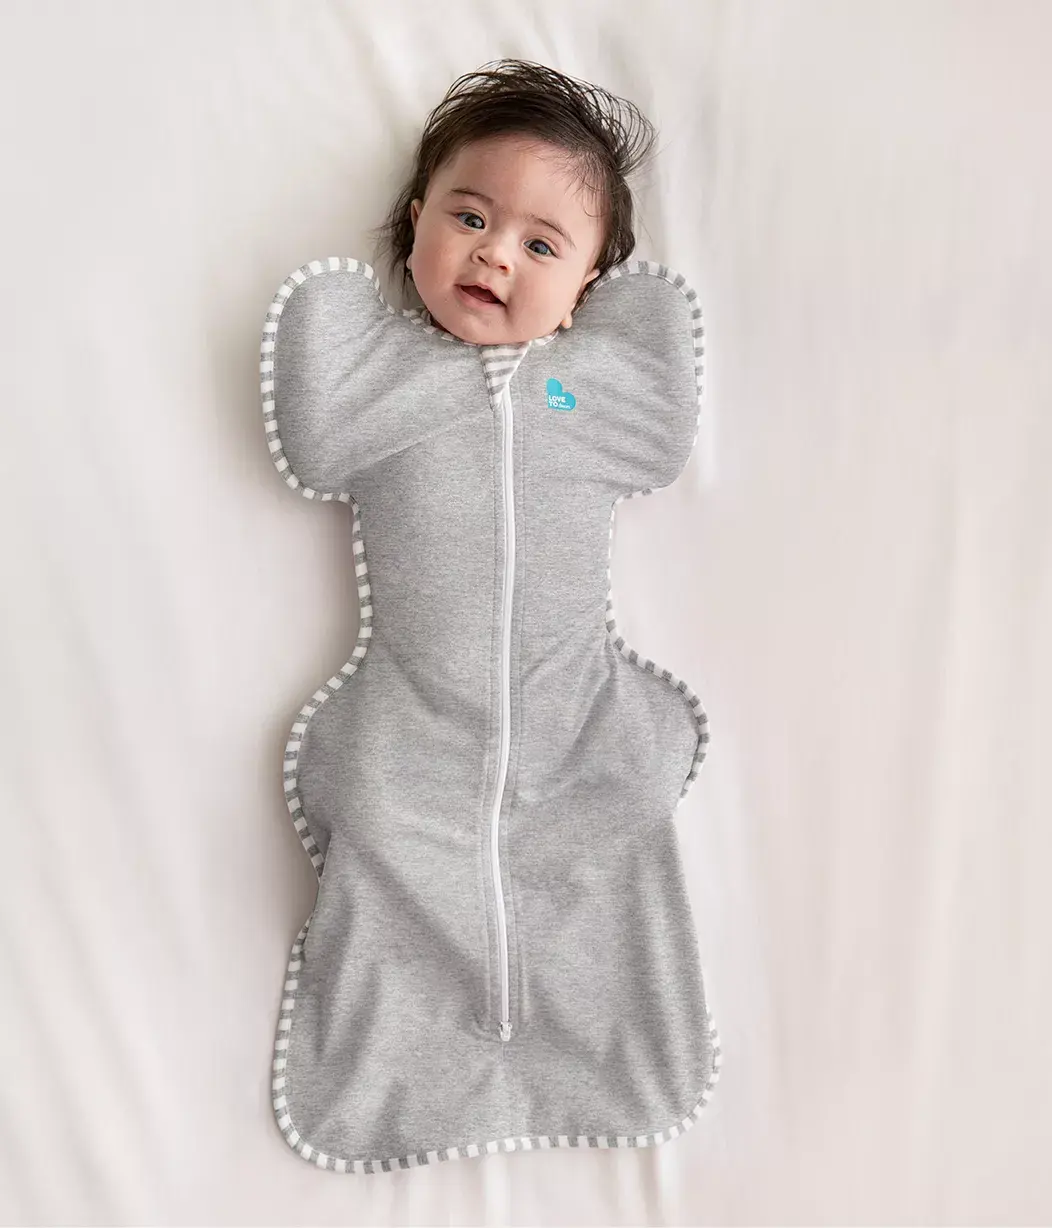 Love To Dream Love To Dream Swaddle UP™ Original 1.0 TOG Grey